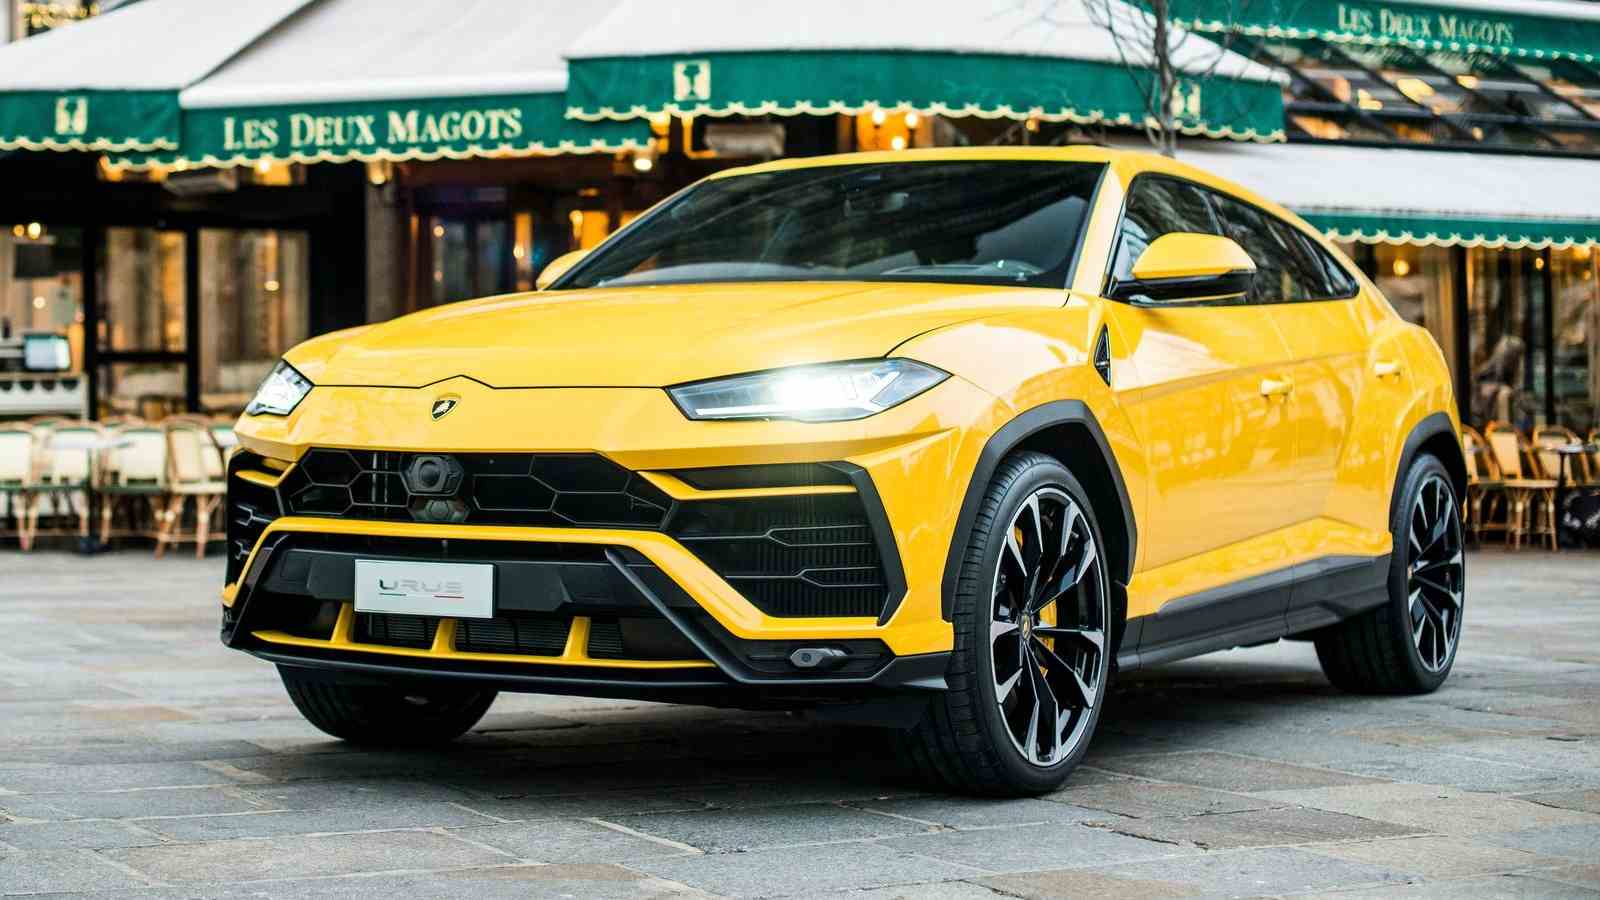 The first production hybrid model from Lamborghini is likely to be the Urus PHEV, due in 2023. Image: Lamborghini